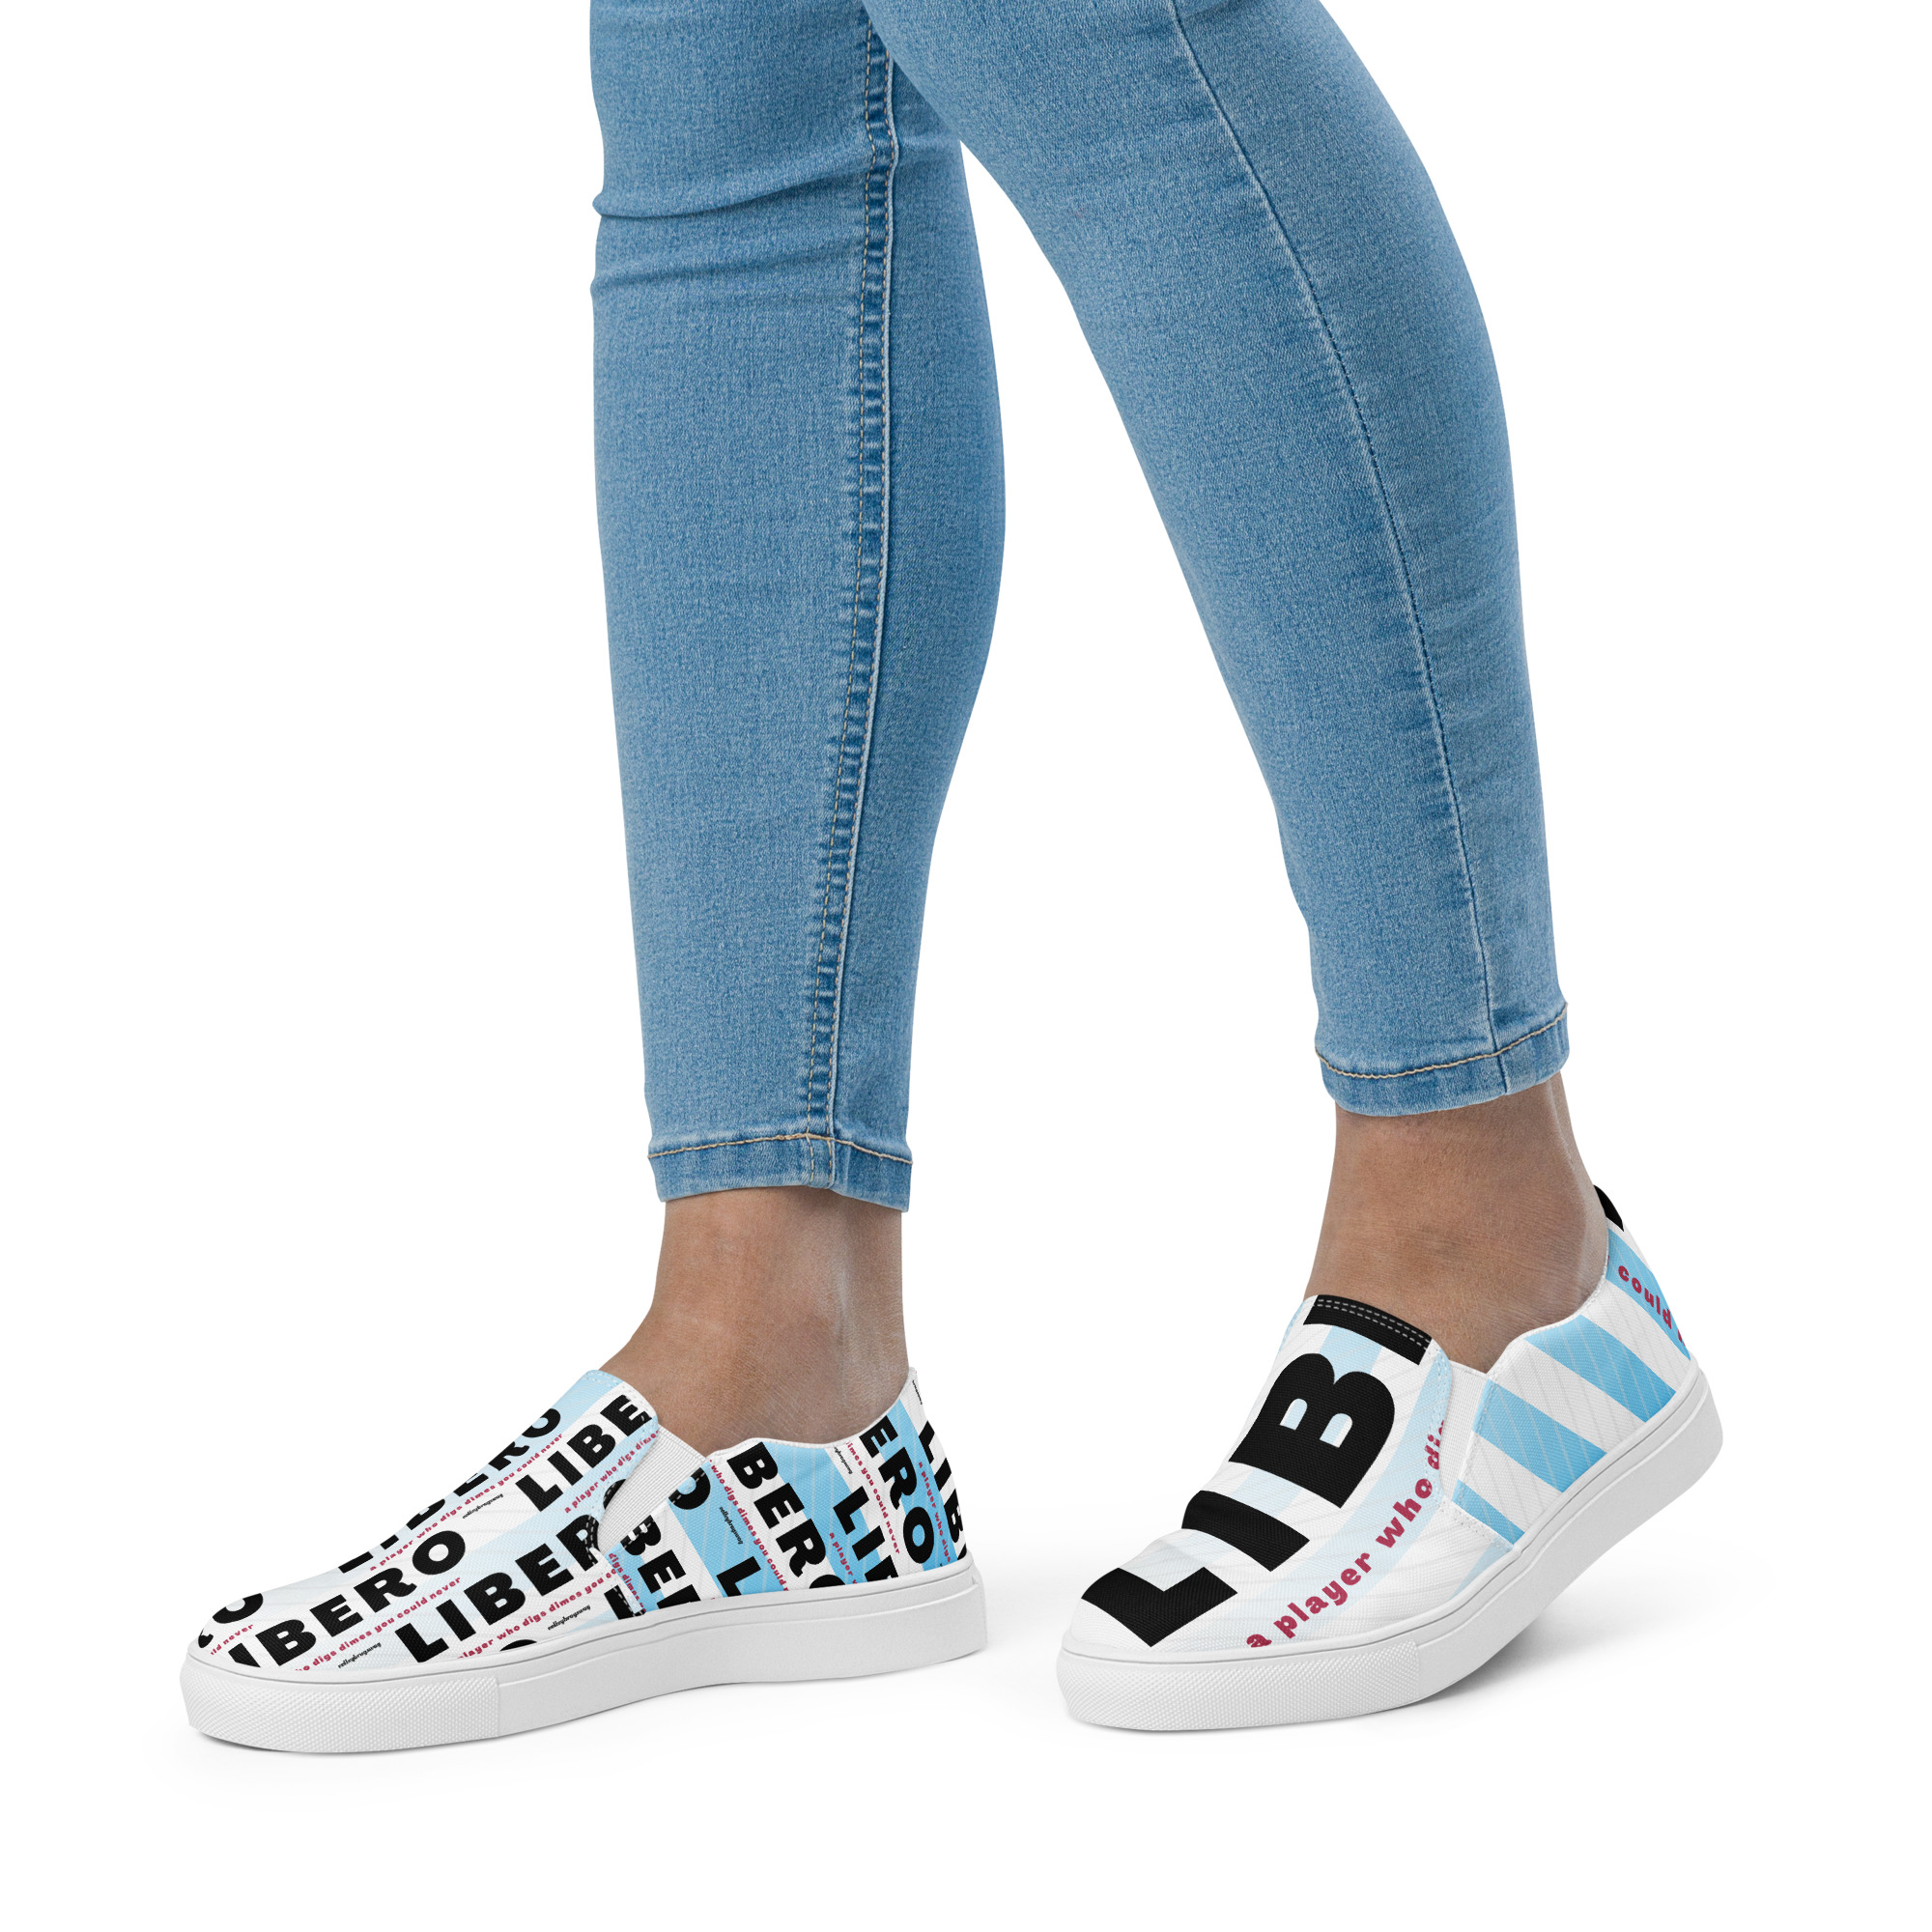 My catchy volleyball slogans like "LIBERO
A player who digs dimes you could never"
are featured on super comfy canvas slip ons women players love to wear to and from the gym.